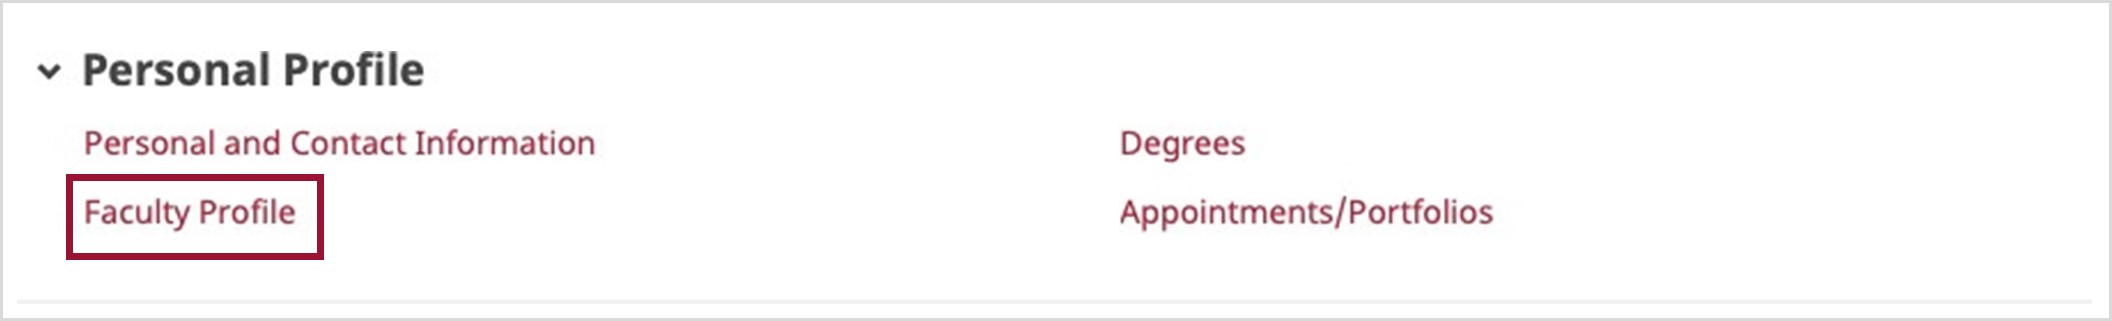 The Personal Profile section of the Faculty Profile. There are four options listed under Personal Profile: Personal and Contact Information, Degrees, Faculty Profile, and Appointments/Portfolios. Faculty Profile is highlighted.